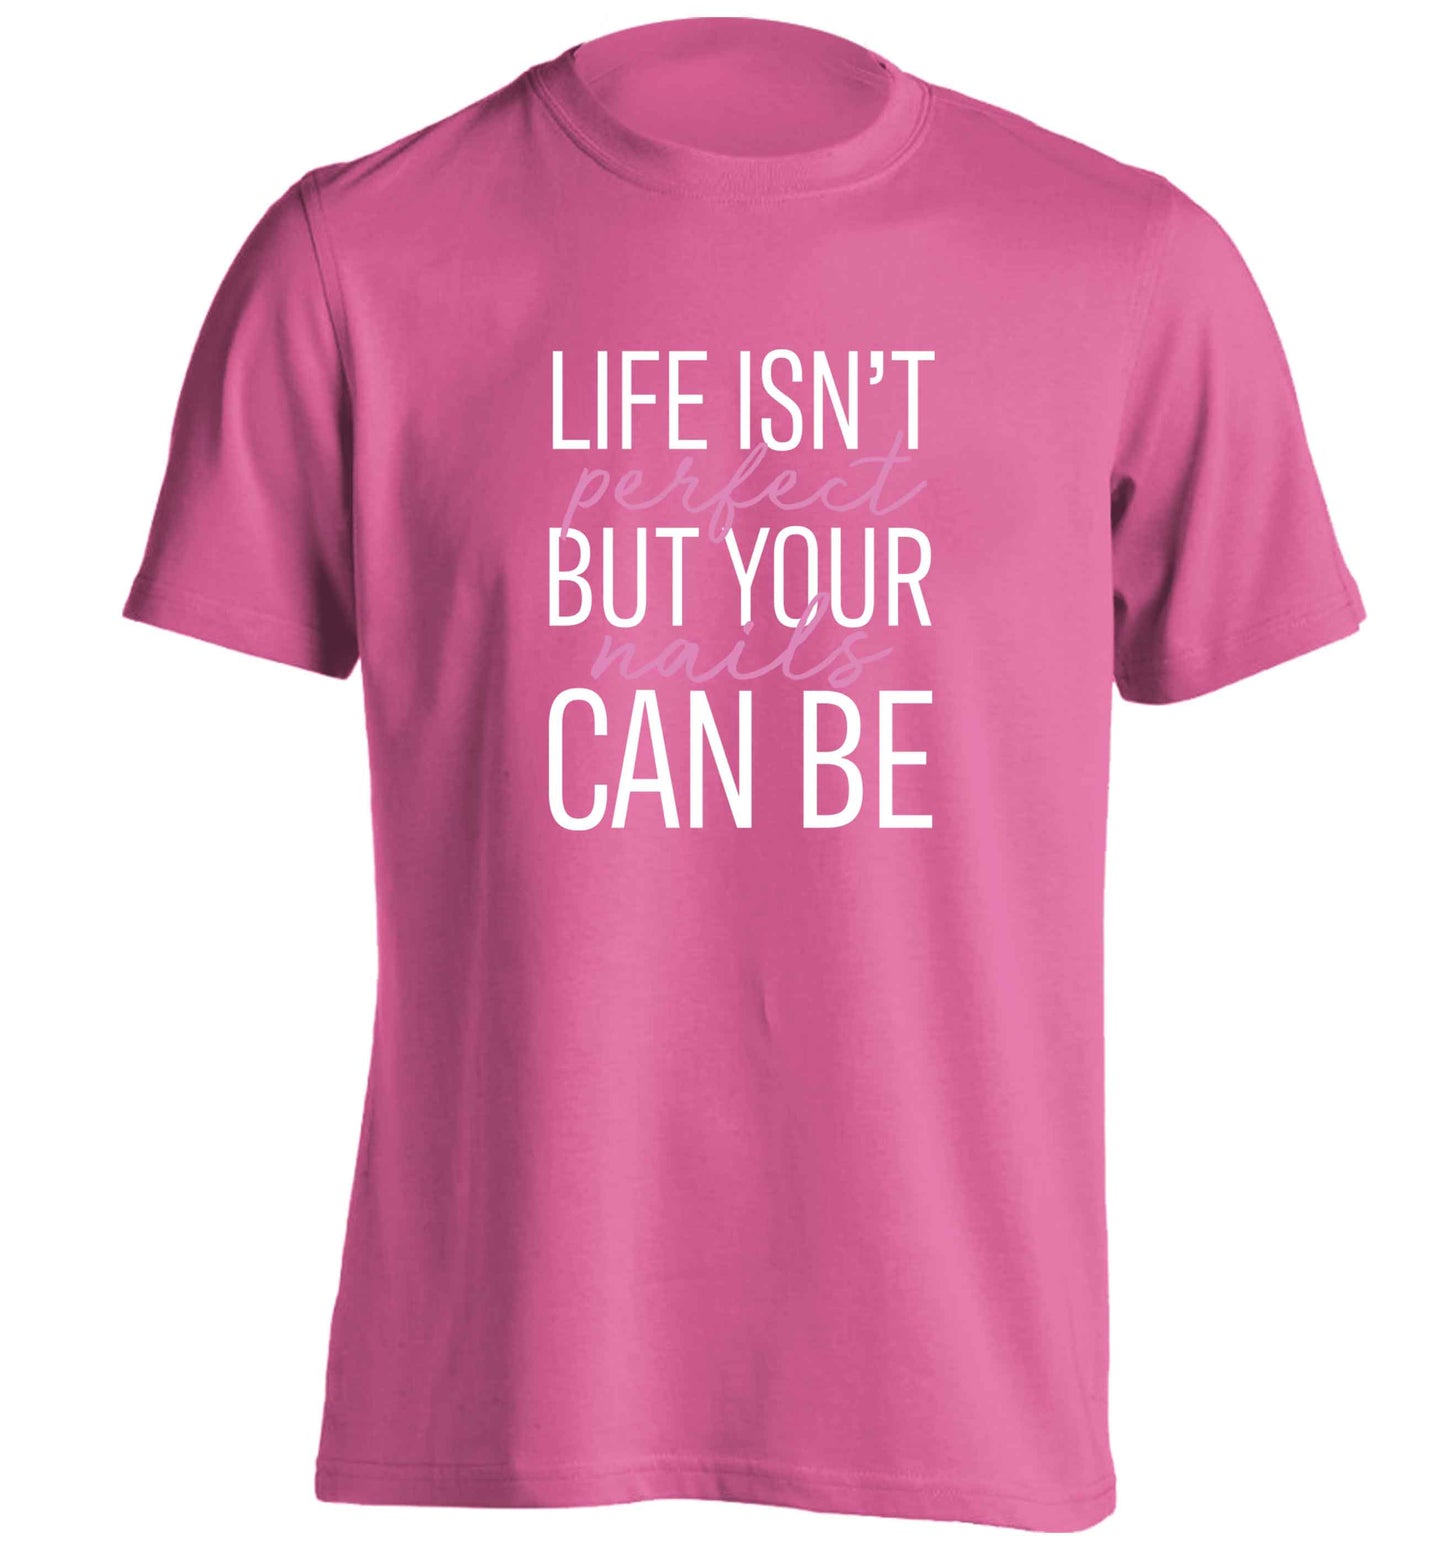 Life isn't perfect but your nails can be adults unisex pink Tshirt 2XL